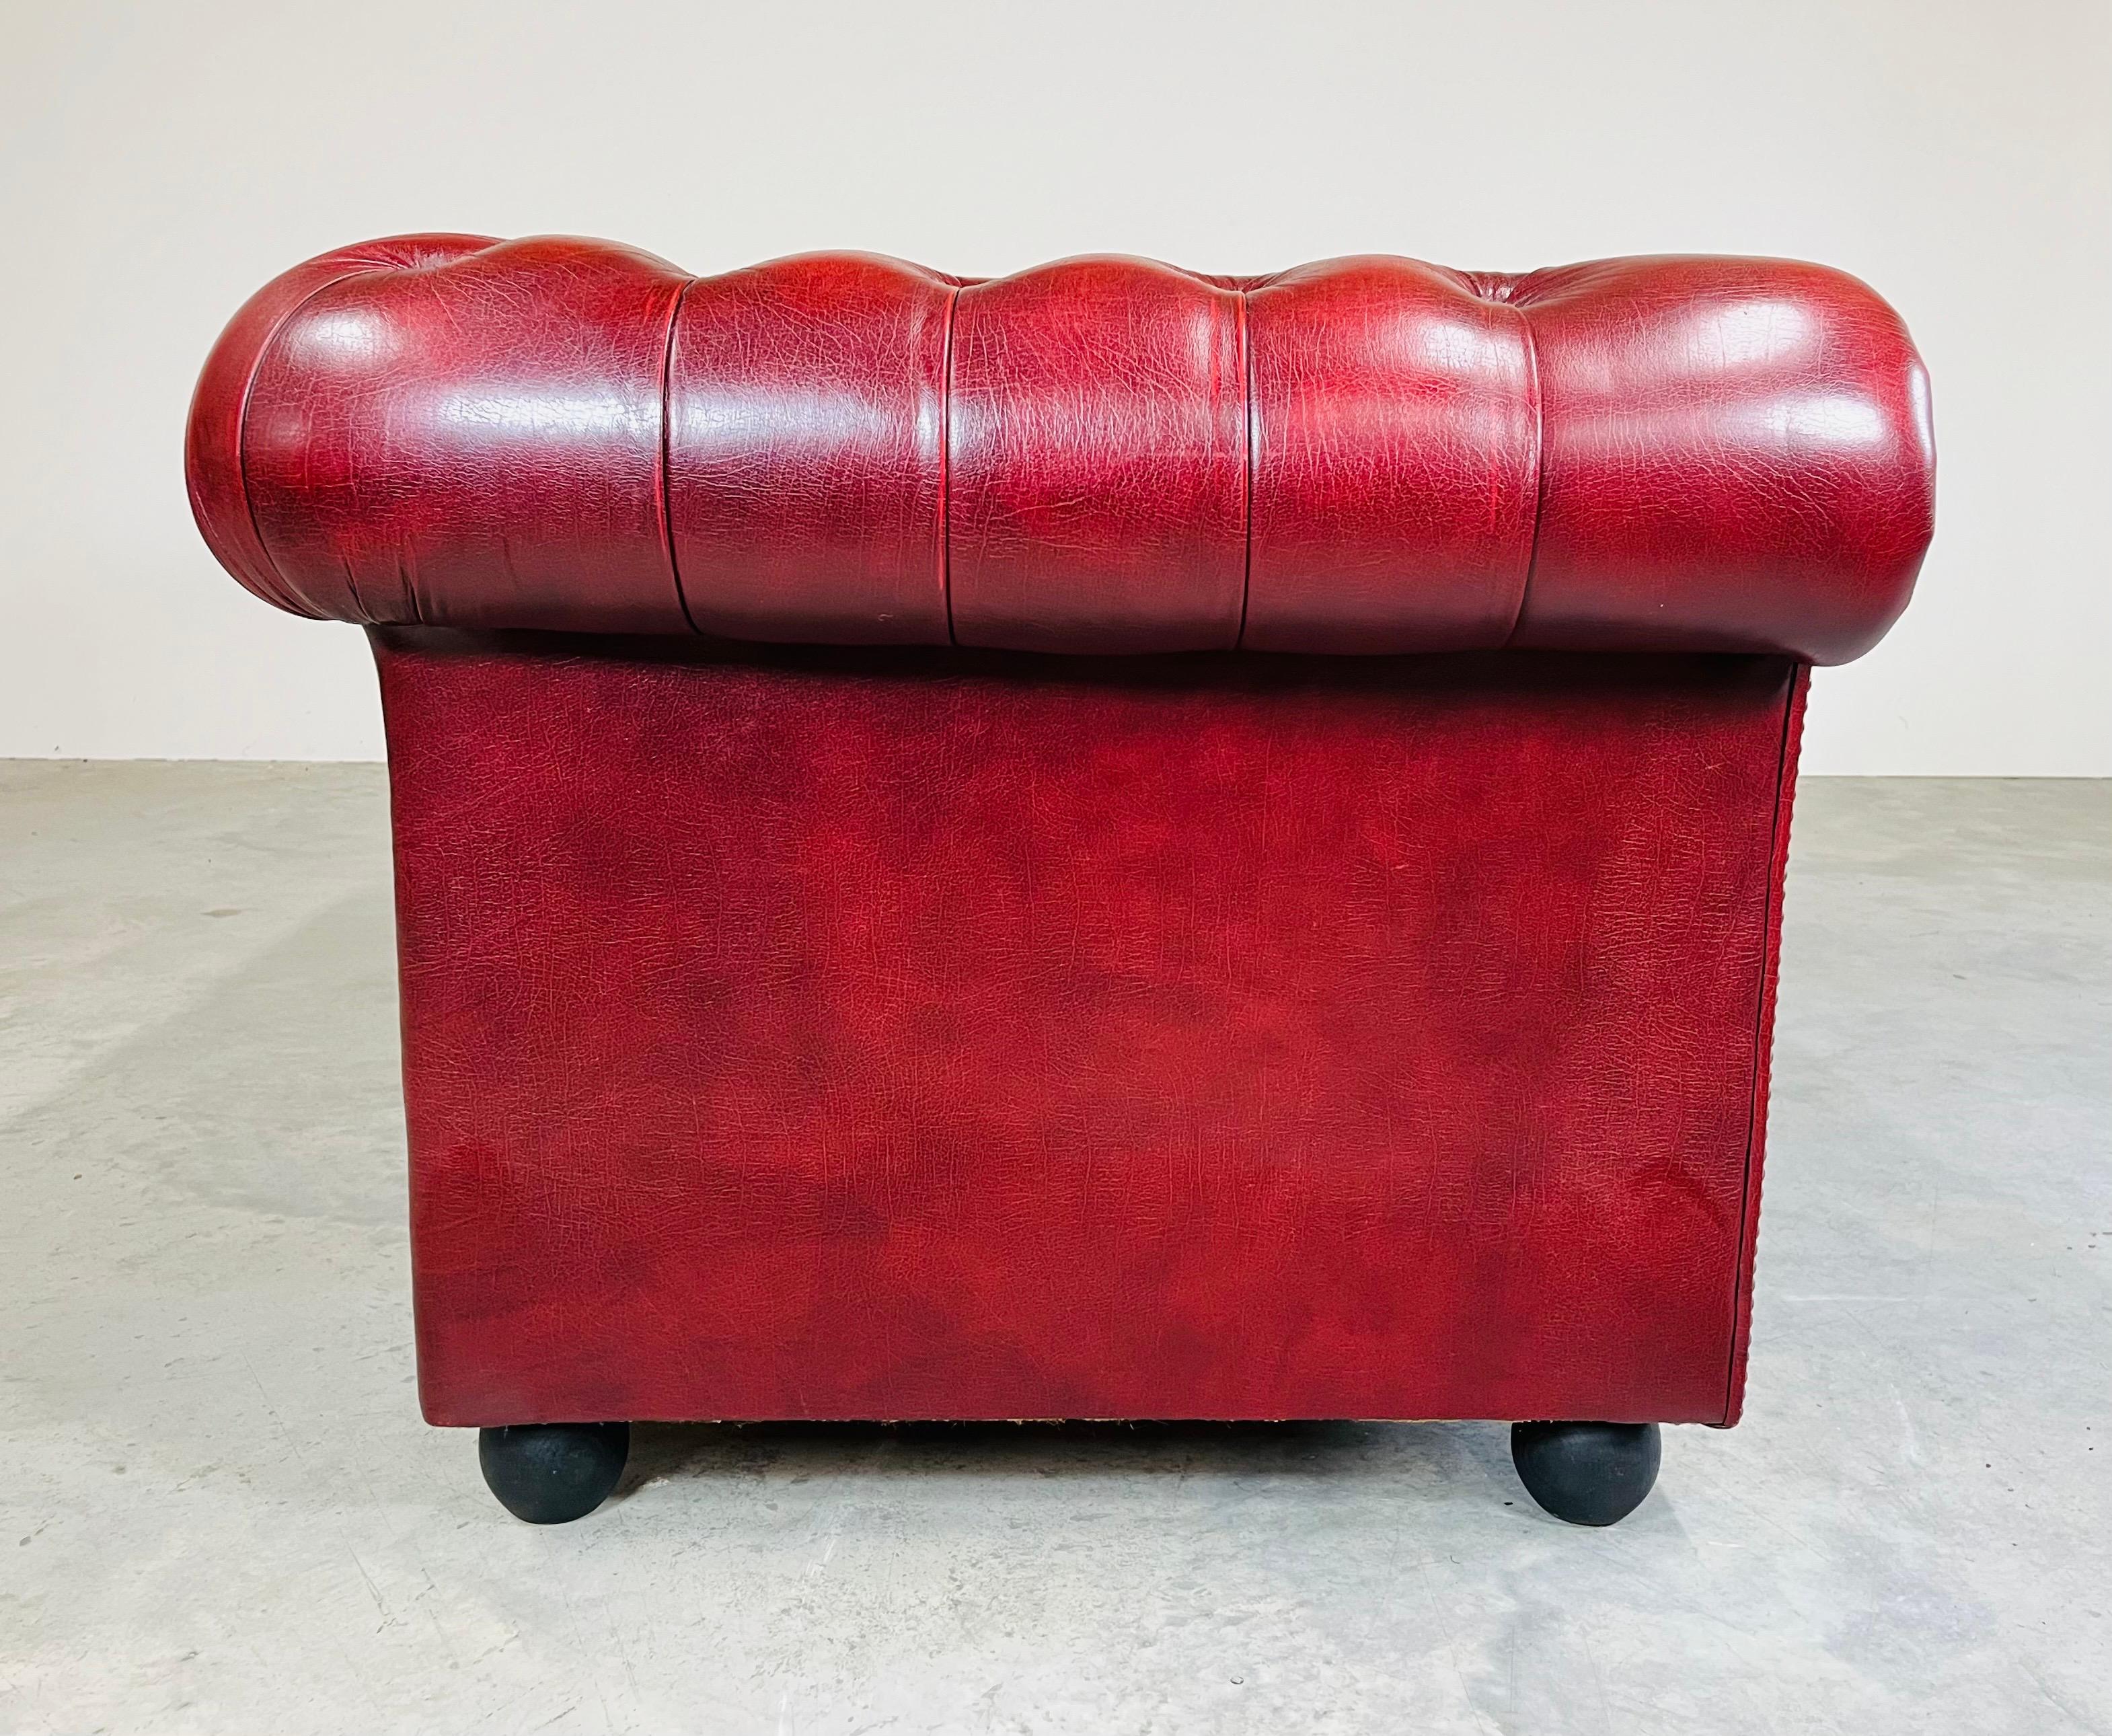 Turned Oxblood Chesterfield Tufted Leather Love Seat Sofa -Great Britain Circa 1970